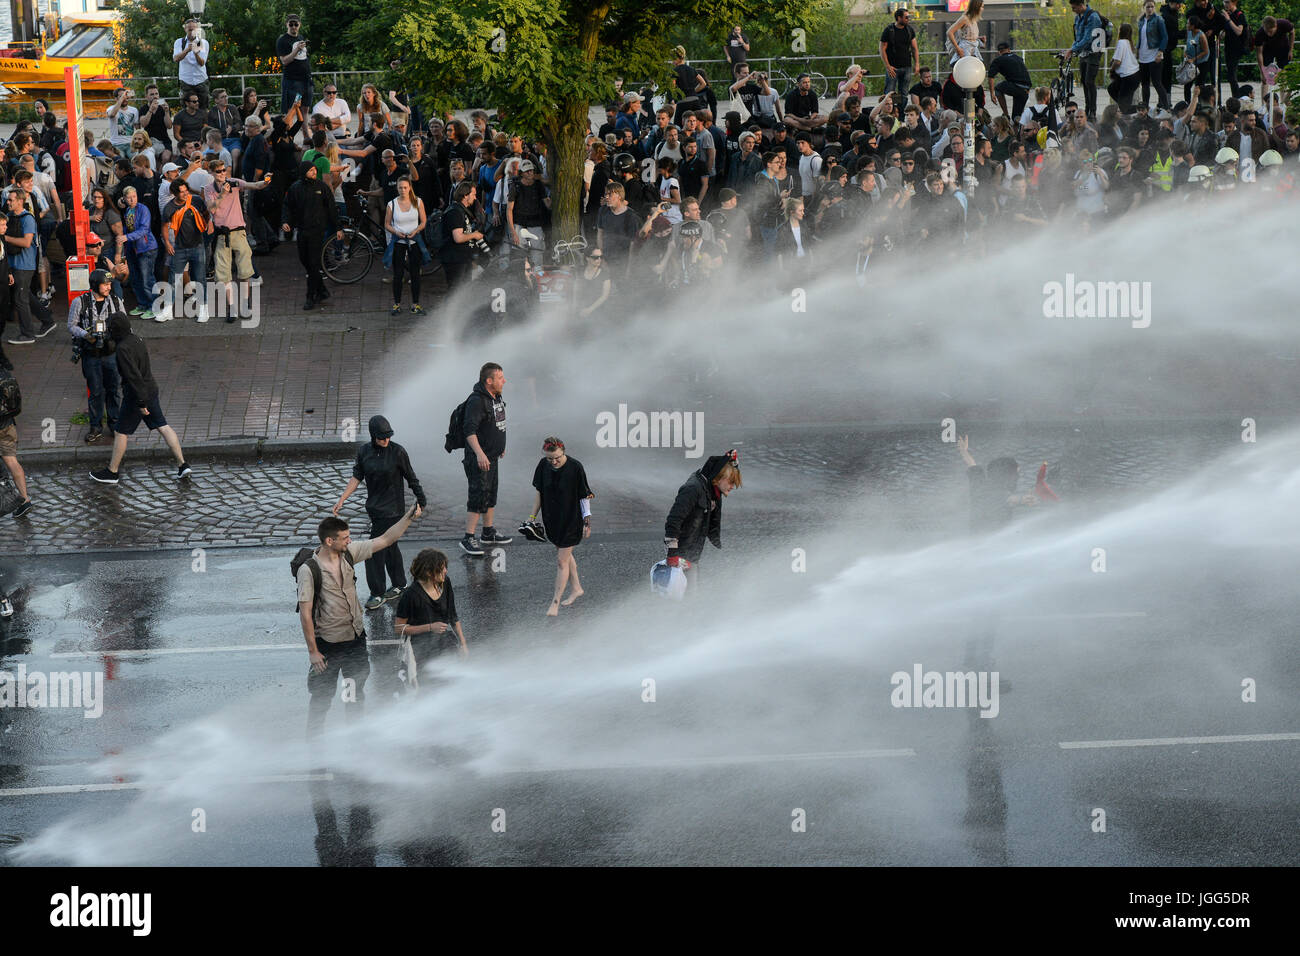 Hamburg, Germany. 6th July, 2017. protest rally 'G-20 WELCOME TO HELL' against G-20 summit , police actions with tear gas and water cannon against the black block with mummed radicals and extremists, Credit: Joerg Boethling/Alamy Live News Stock Photo